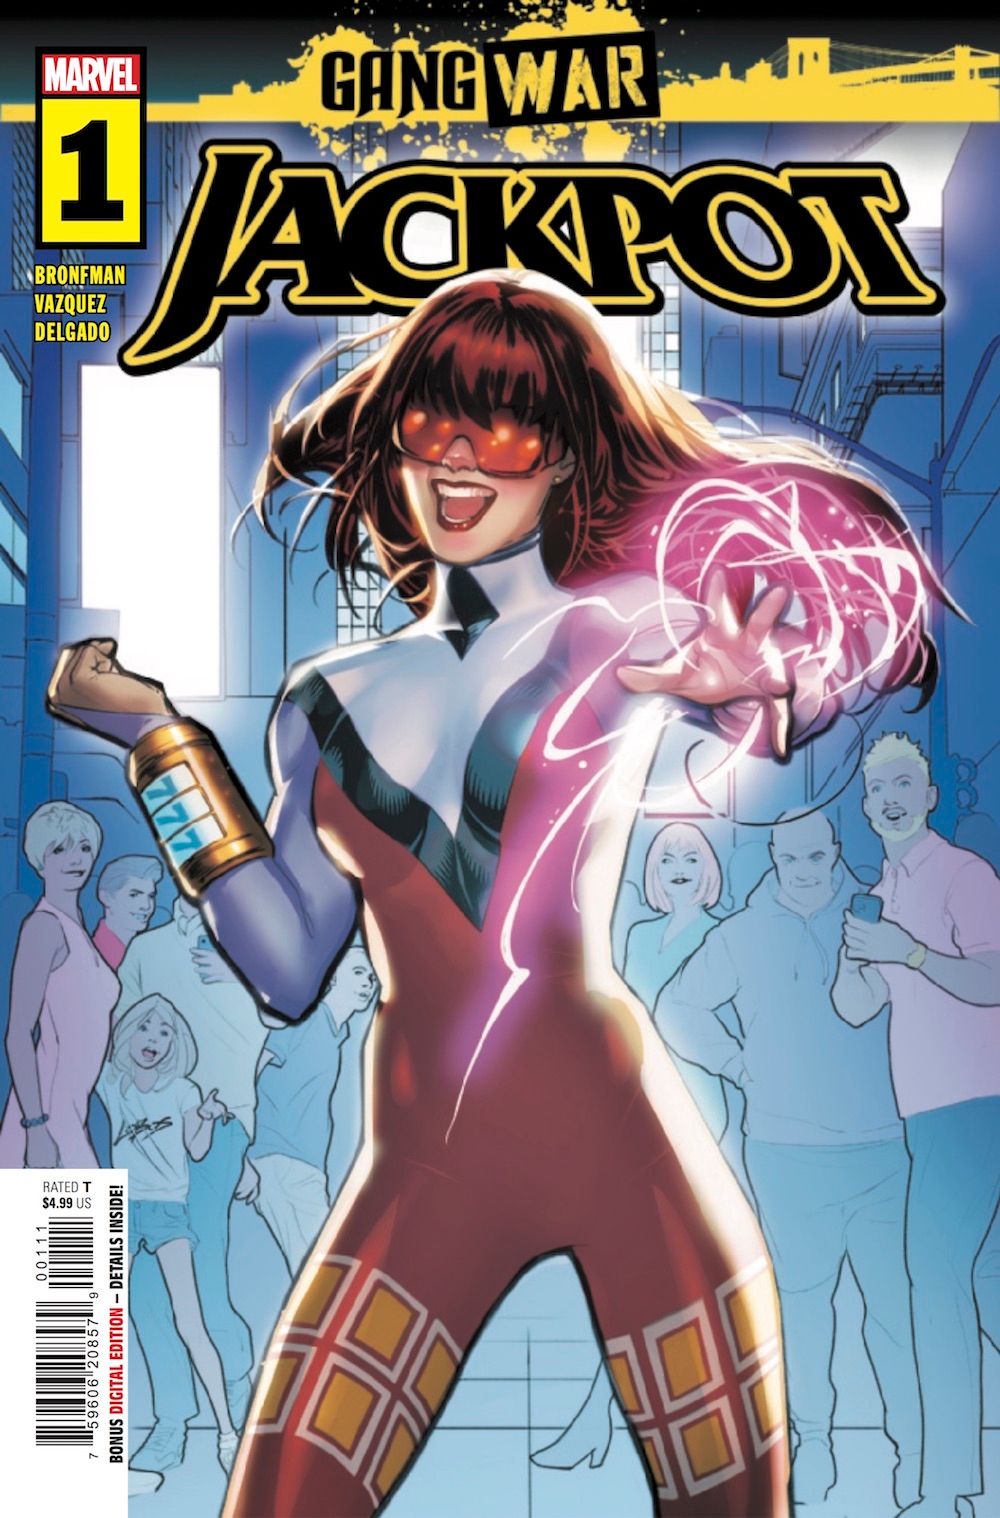 Mary Jane Watson in Jackpot costume confidently showing off her powers. Art by Pablo Villalobos.